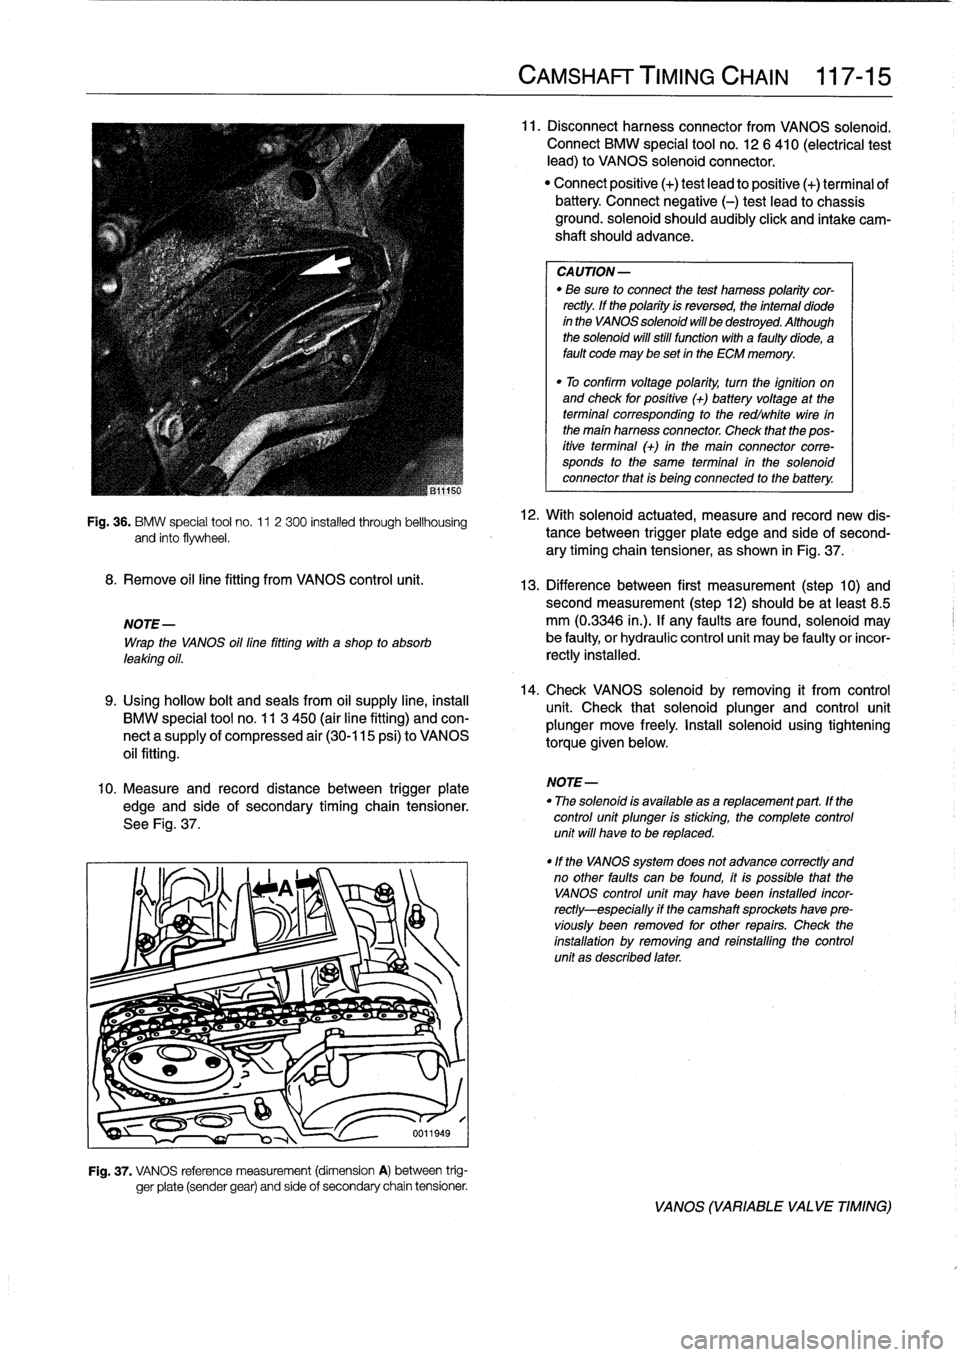 BMW 328i 1998 E36 Workshop Manual 
Fig
.
36
.
BMW
special
tool
no
.
11
2
300
installed
through
bellhousing
and
finto
flywheel
.

8
.
Remove
oil
line
fitting
from
VANOS
control
unit
.

NOTE-

Wrap
the
VANOS
oil
line
fitting
with
a
shop